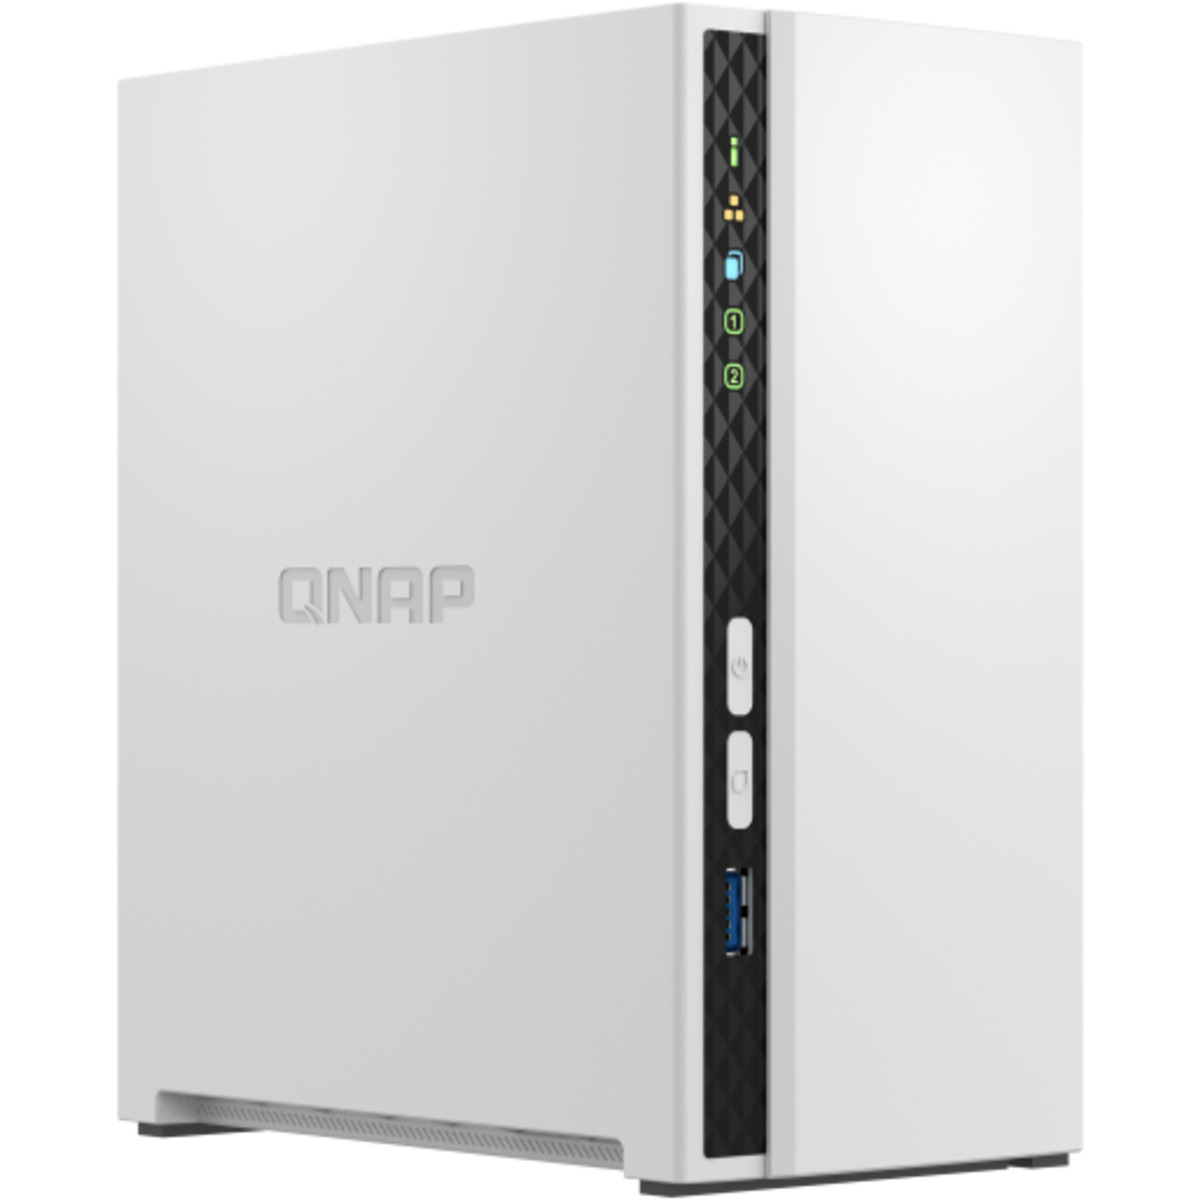 buy QNAP TS-233 44tb Desktop NAS - Network Attached Storage Device 2x22000gb Western Digital Ultrastar HC570 WUH722222ALE6L4 3.5 7200rpm SATA 6Gb/s HDD ENTERPRISE Class Drives Installed - Burn-In Tested - nas headquarters buy network attached storage server device das new raid-5 free shipping usa spring sale TS-233